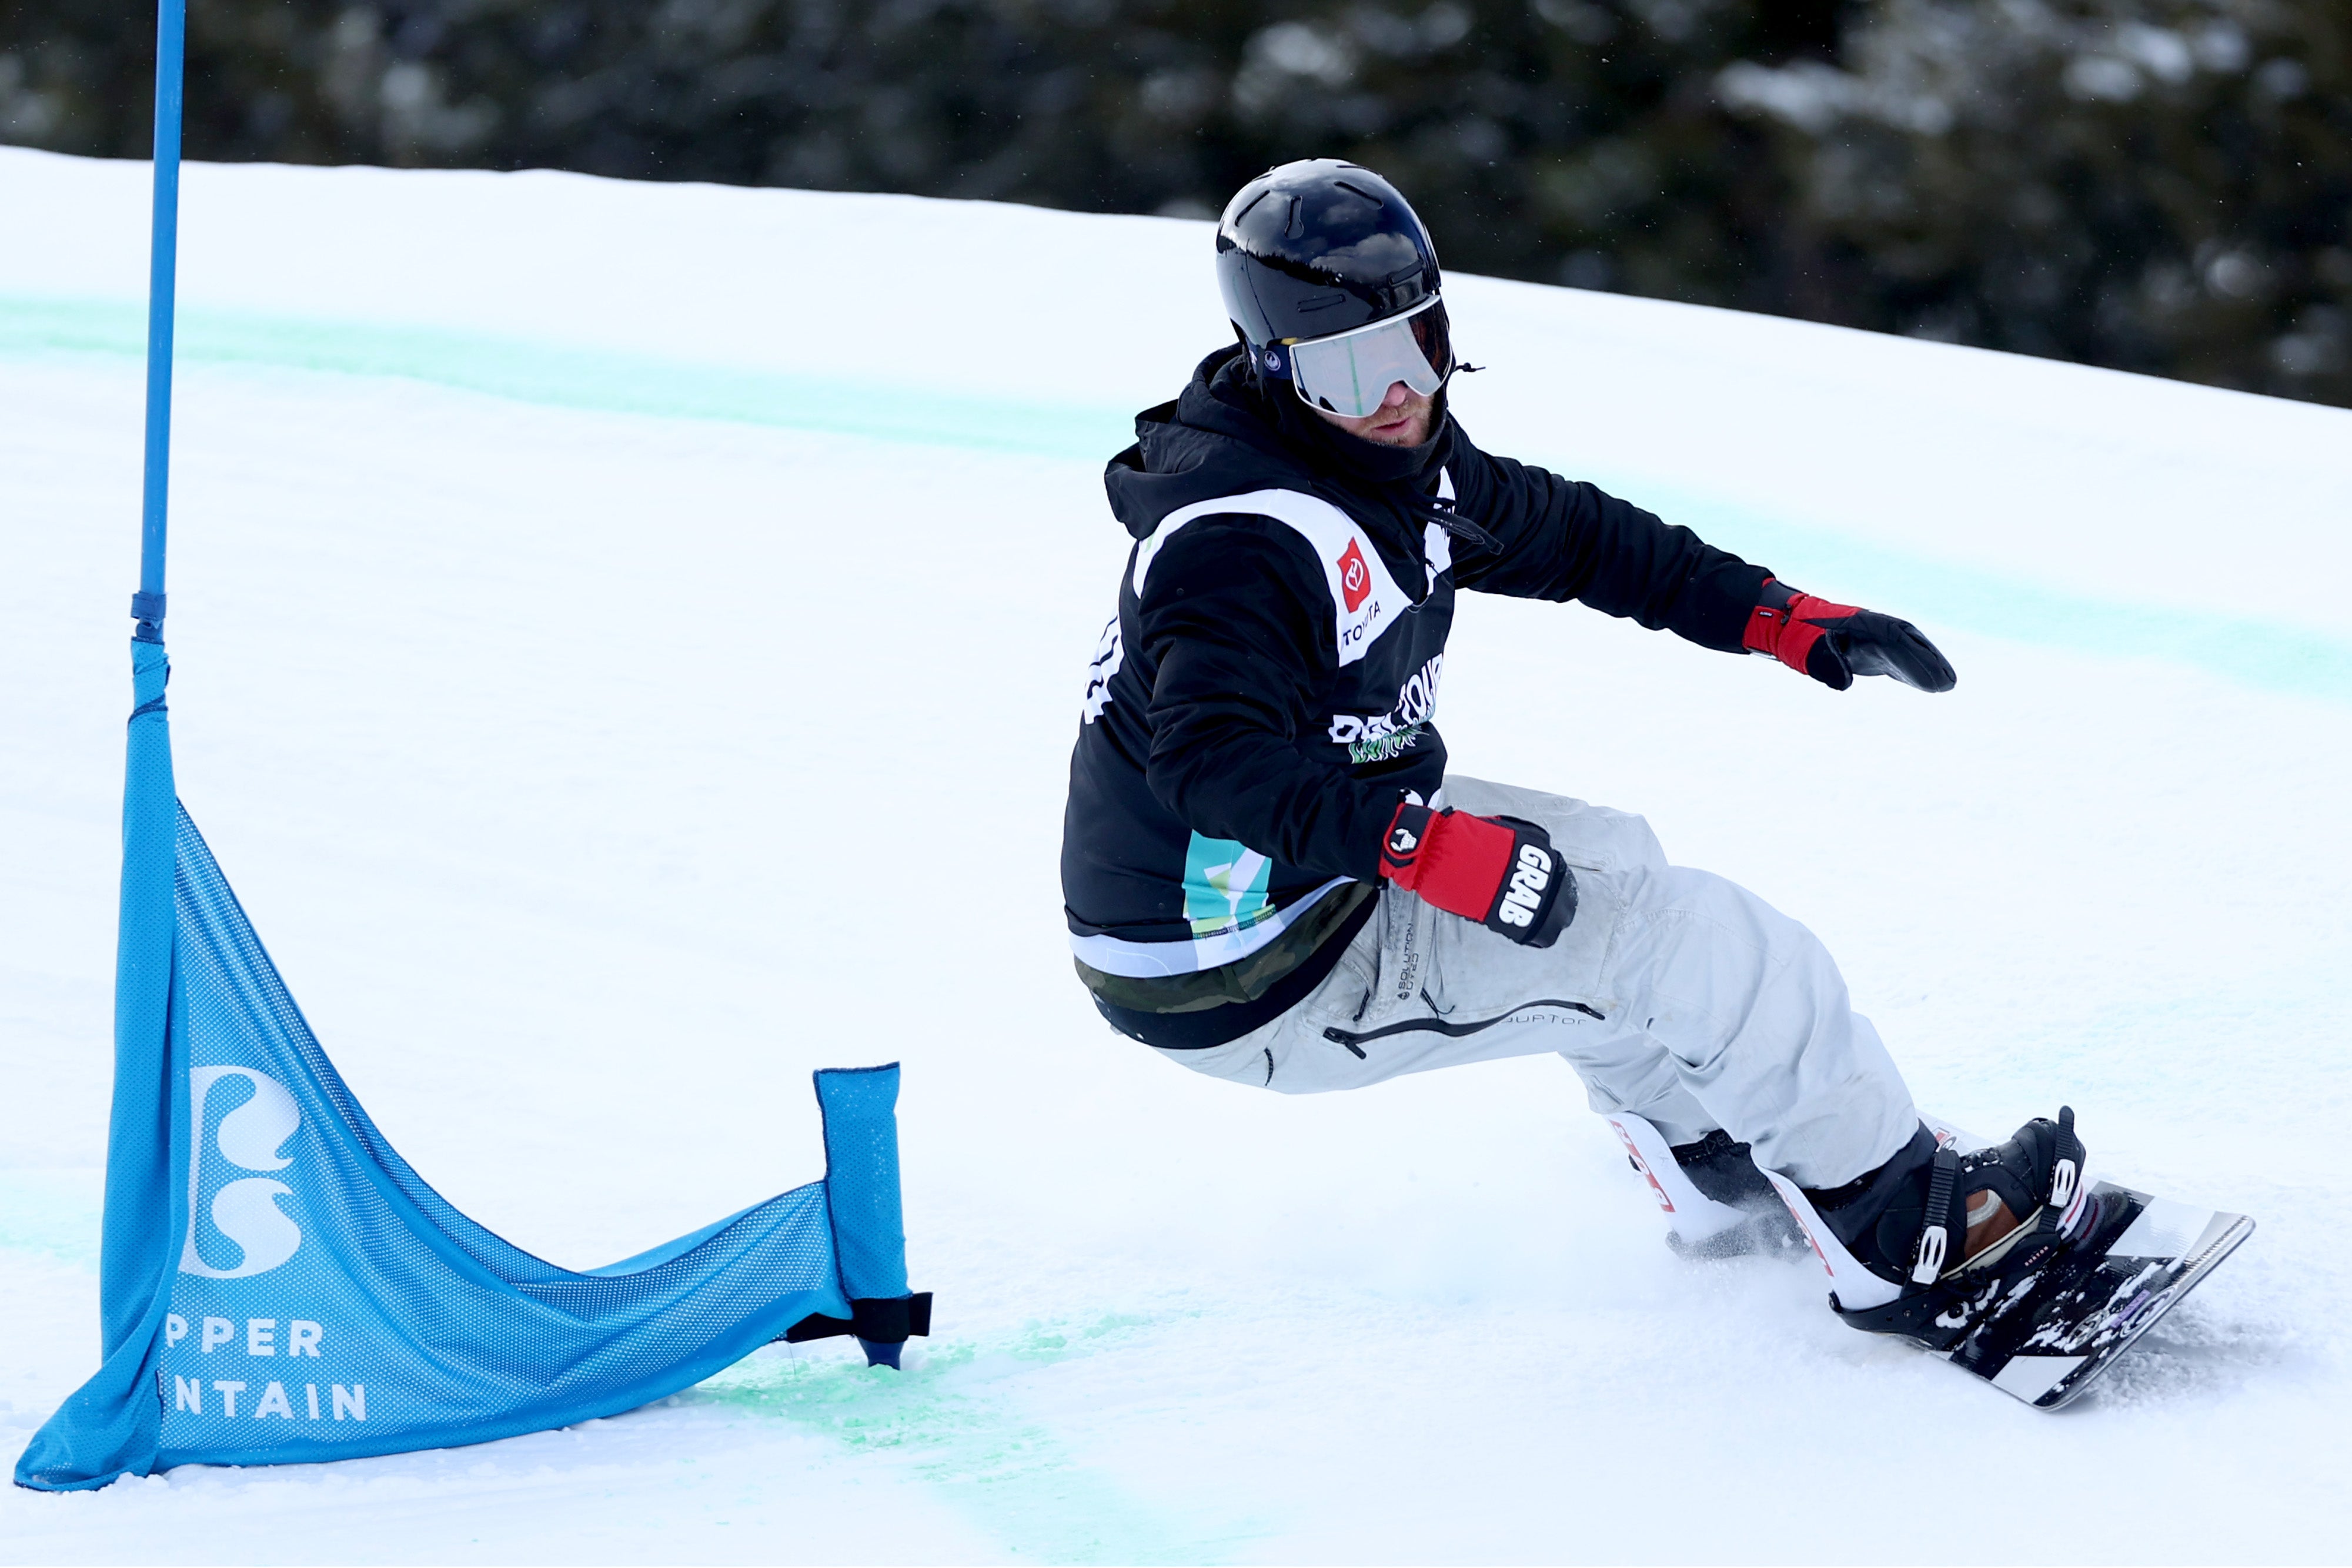 Owen Pick is ready to compete at his second Winter Paralympics